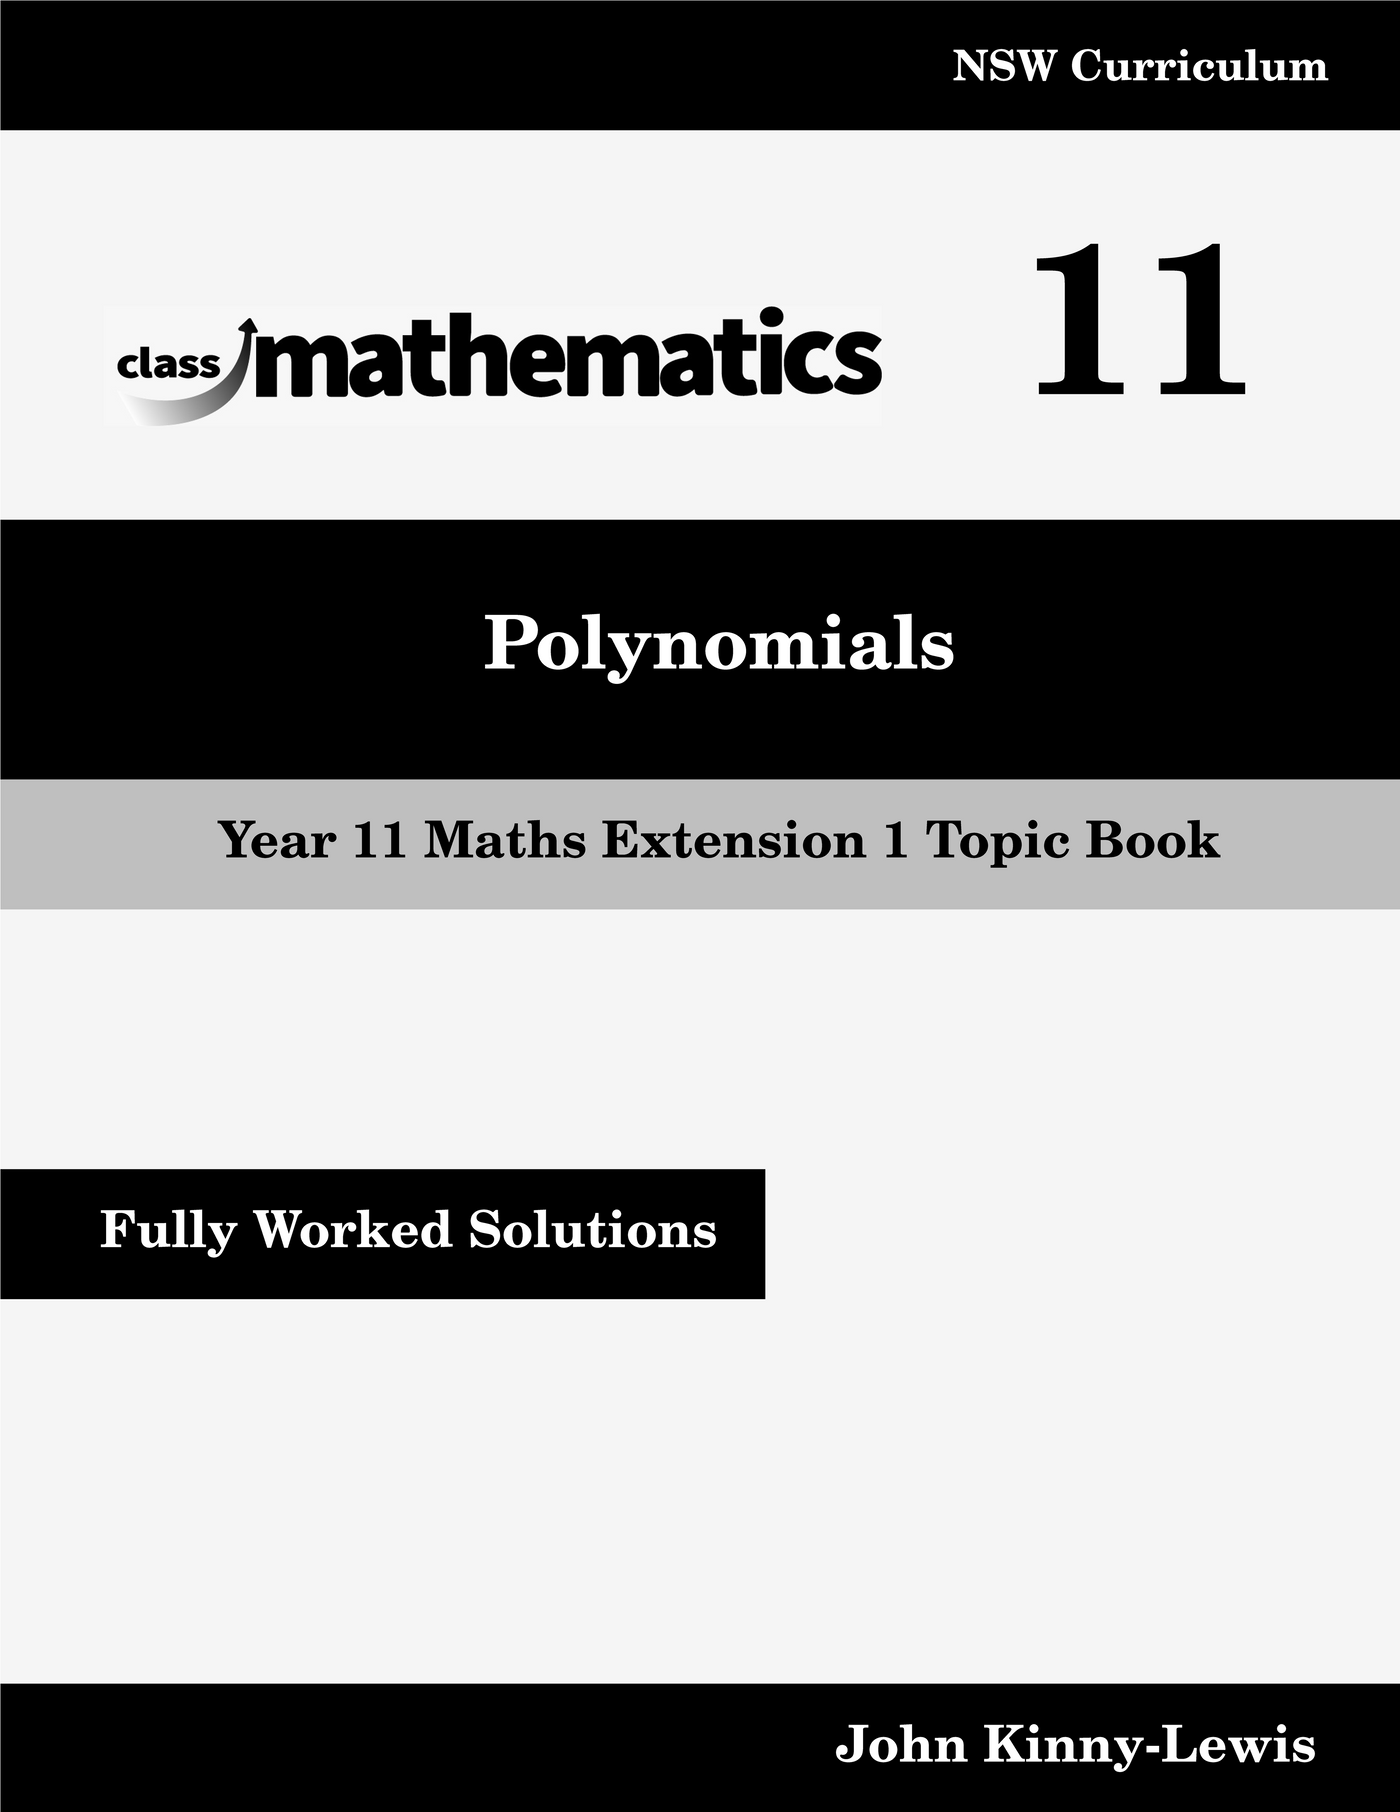 NSW Year 11 Maths Extension 1 - Polynomials